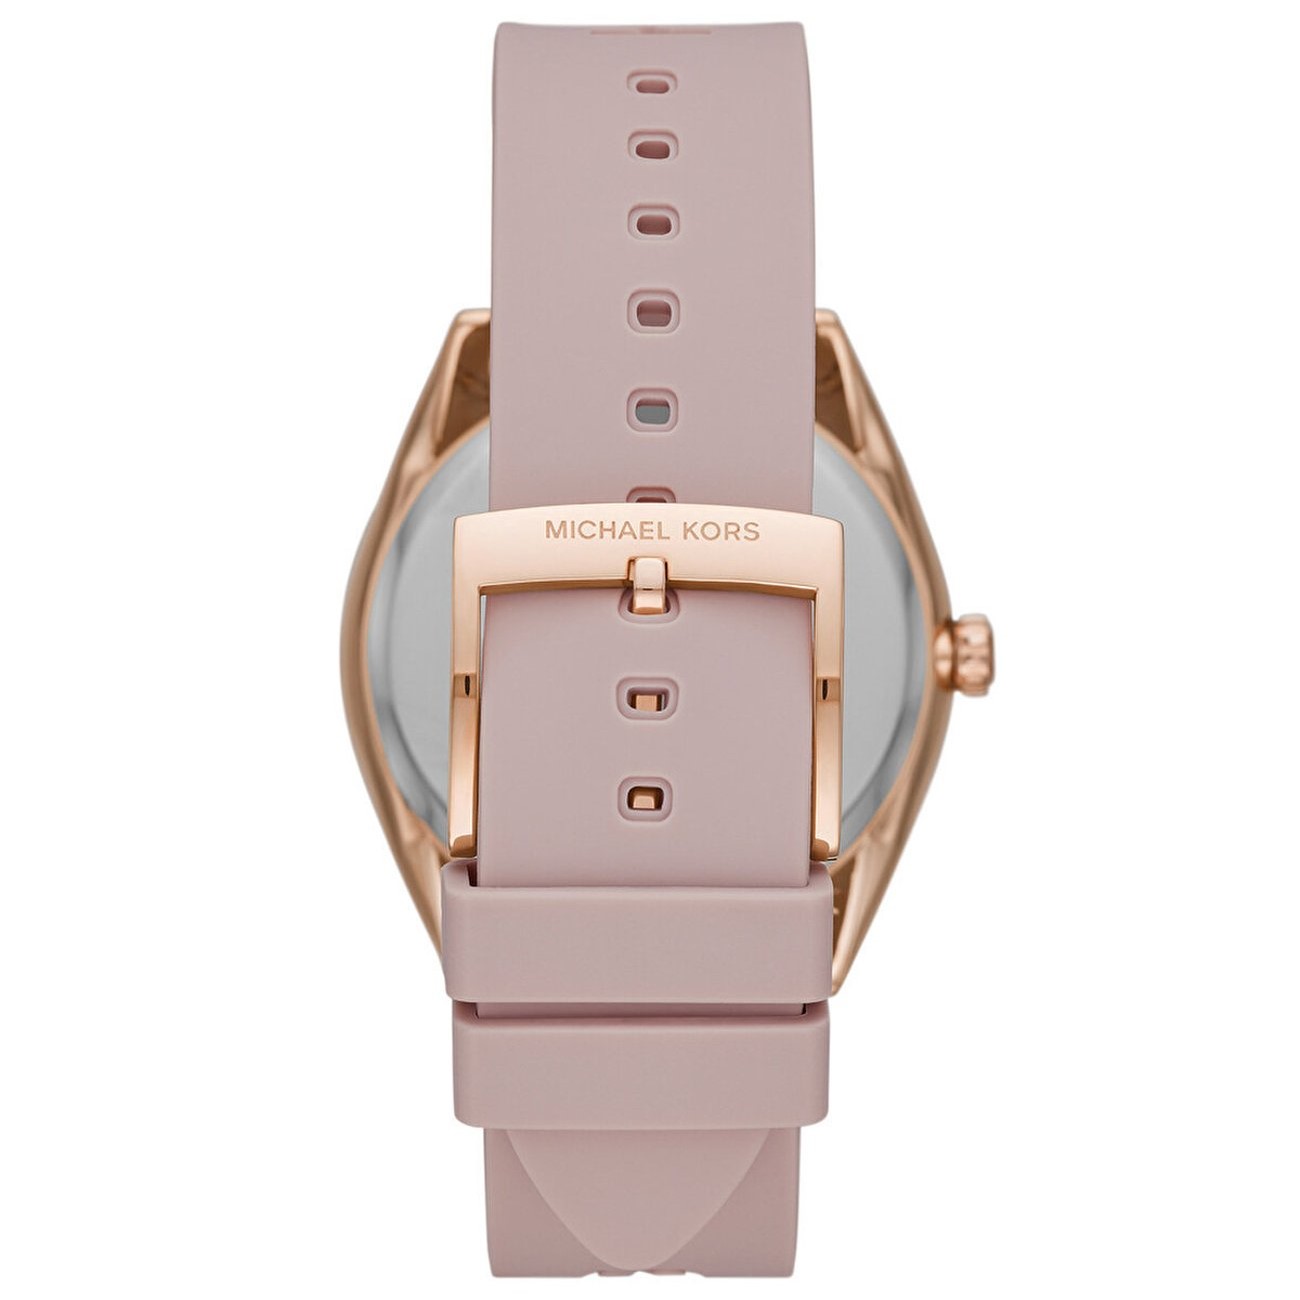 ĐỒNG HỒ ĐEO TAY NỮ MICHAEL KORS RUNWAY JANELLE ROSE GOLD PINK SILICONE WATCH MK7139 7